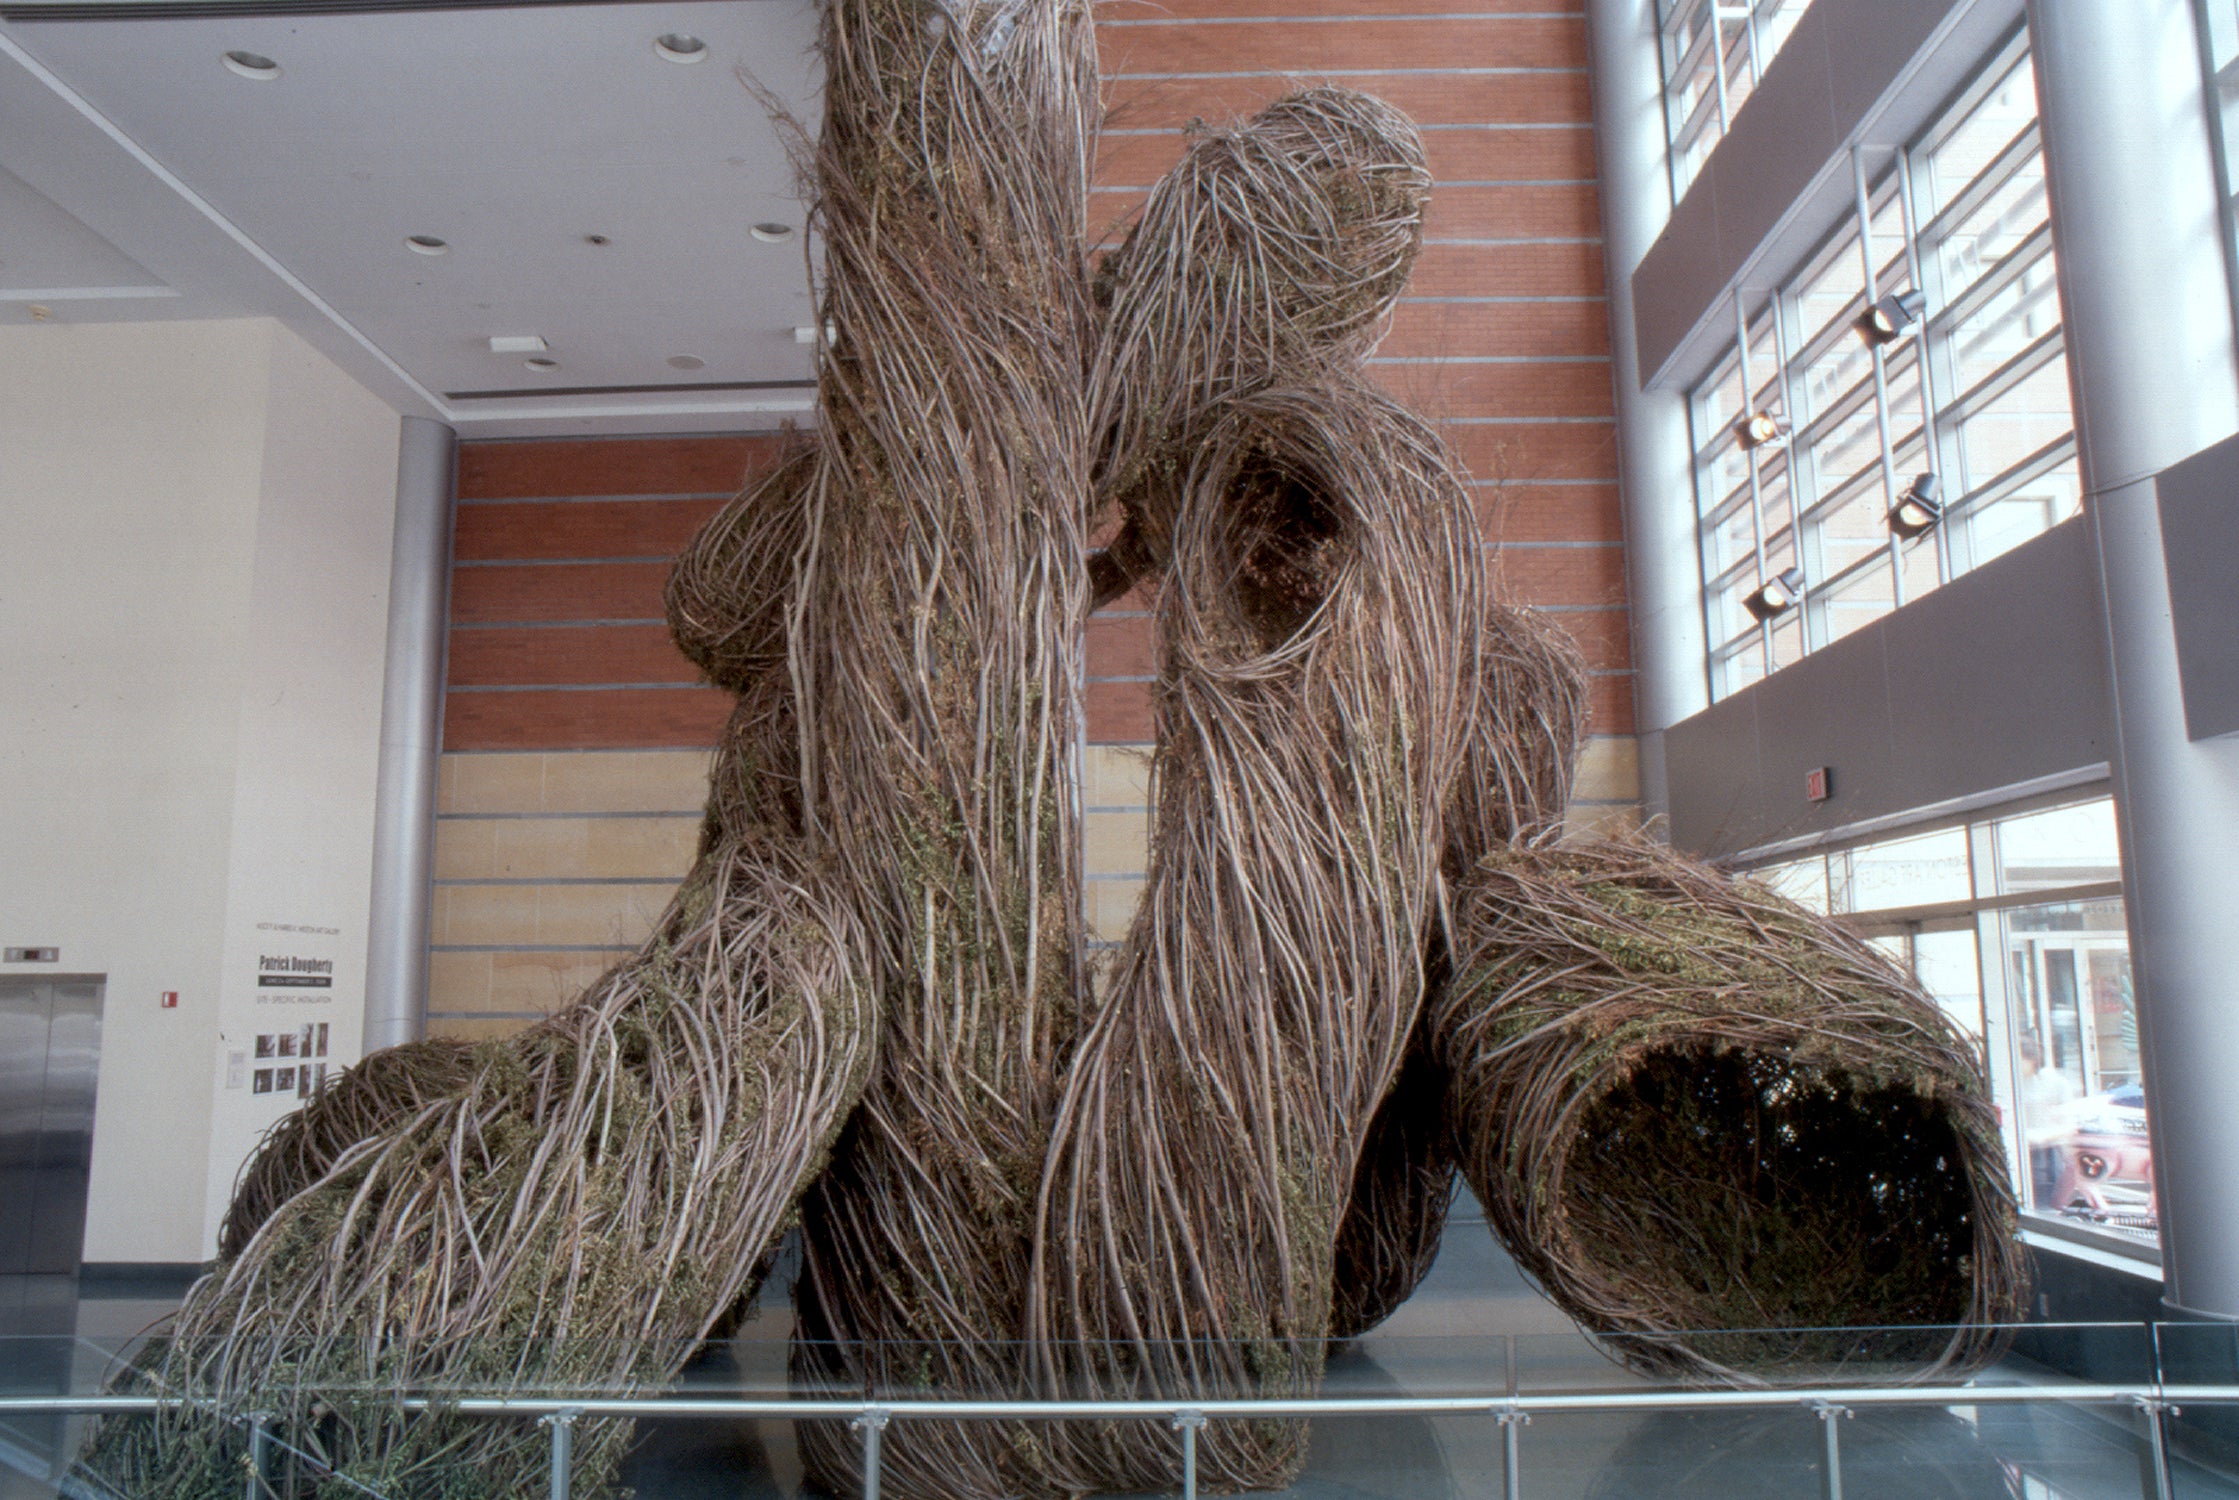 Site-Specific Installation by Patrick Dougherty